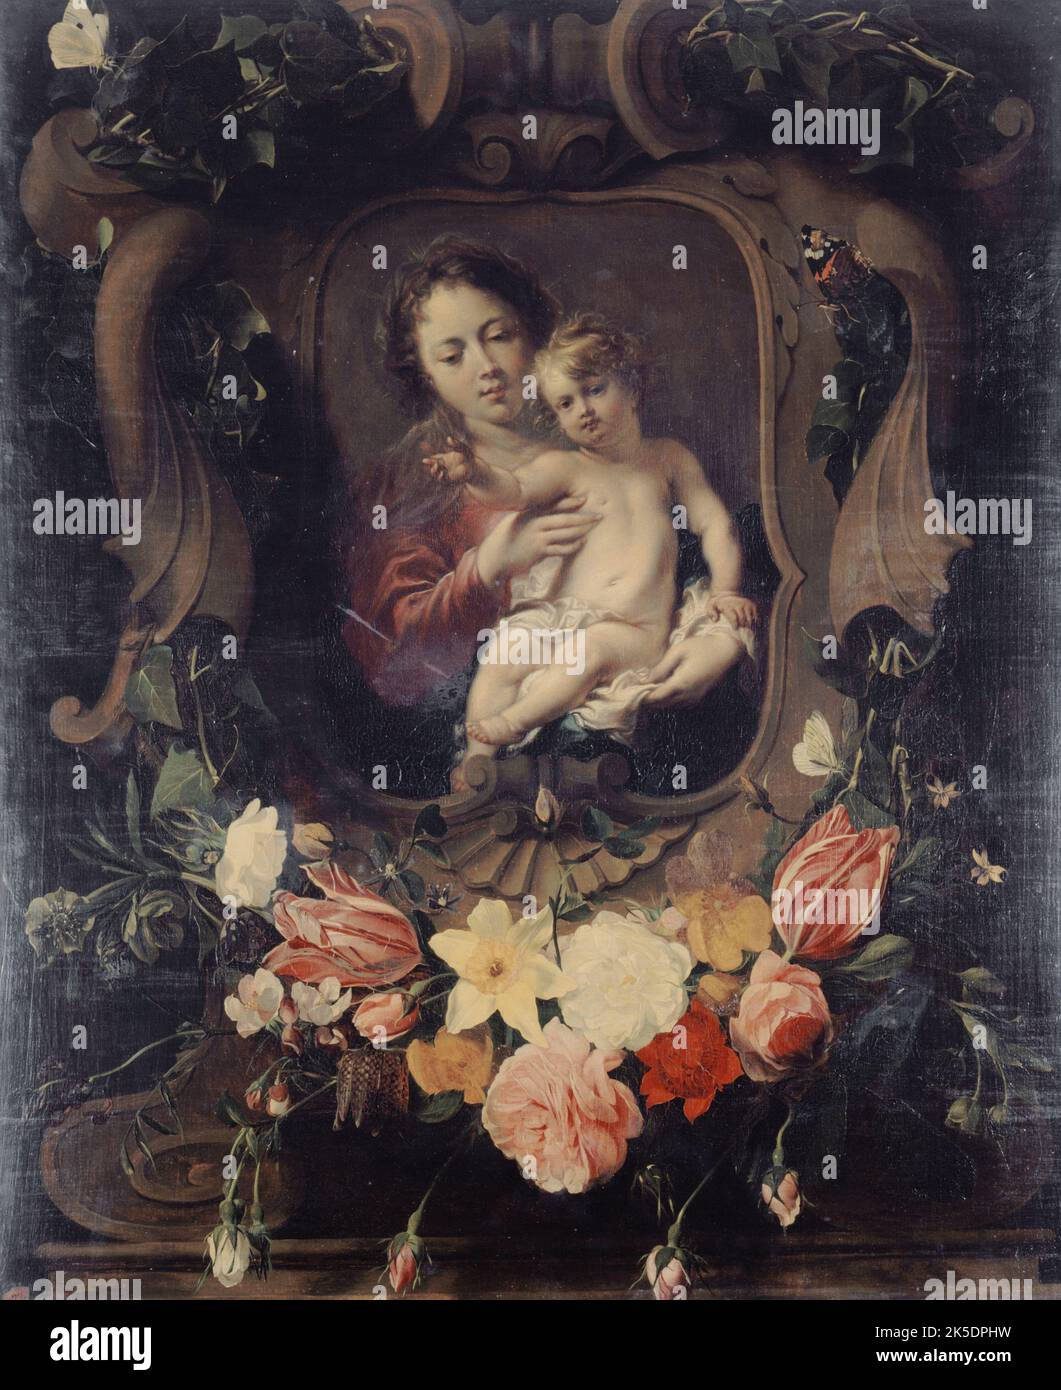 Vierge &#xe0; l'enfant dans une couronne de fleurs, 17th century. Virgin and Child within a floral wreath. Cartouche with garland of leaves and flowers including roses, tulips and daffodils. Stock Photo